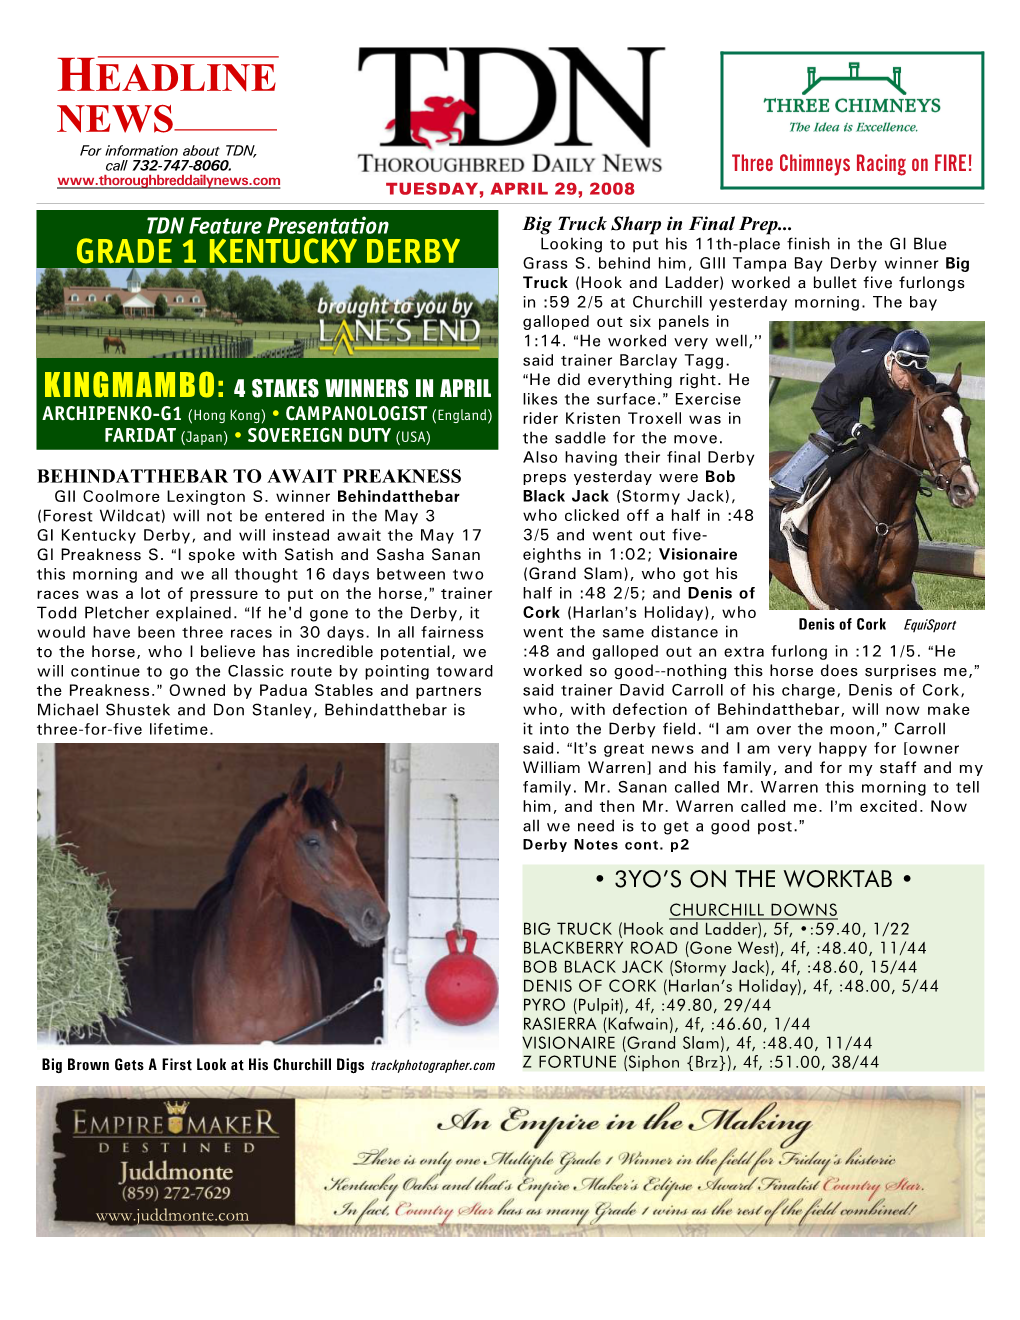 HEADLINE NEWS for Information About TDN, Call 732-747-8060